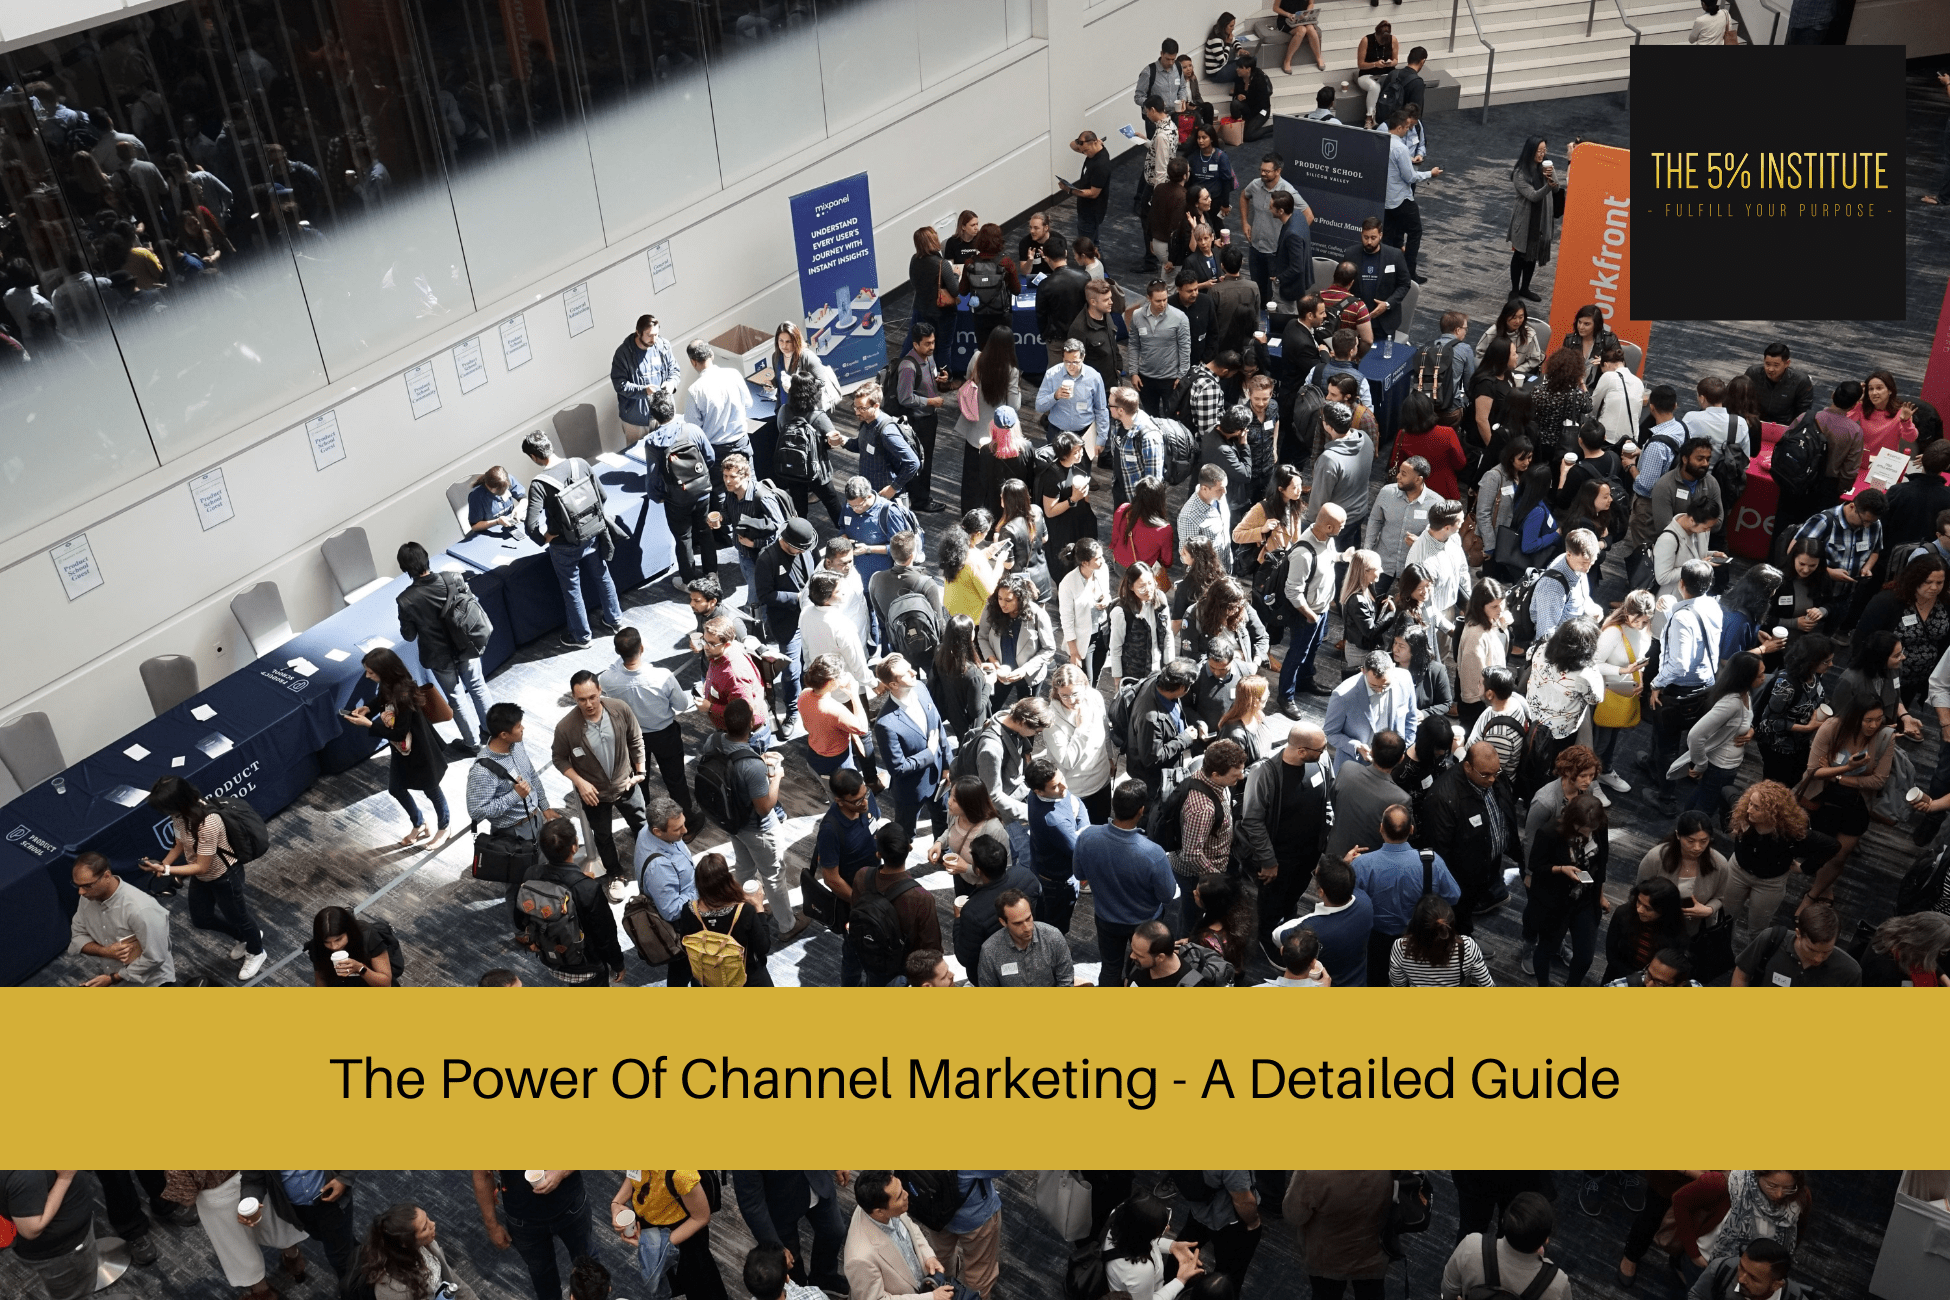 The Power Of Channel Marketing - A Detailed Guide